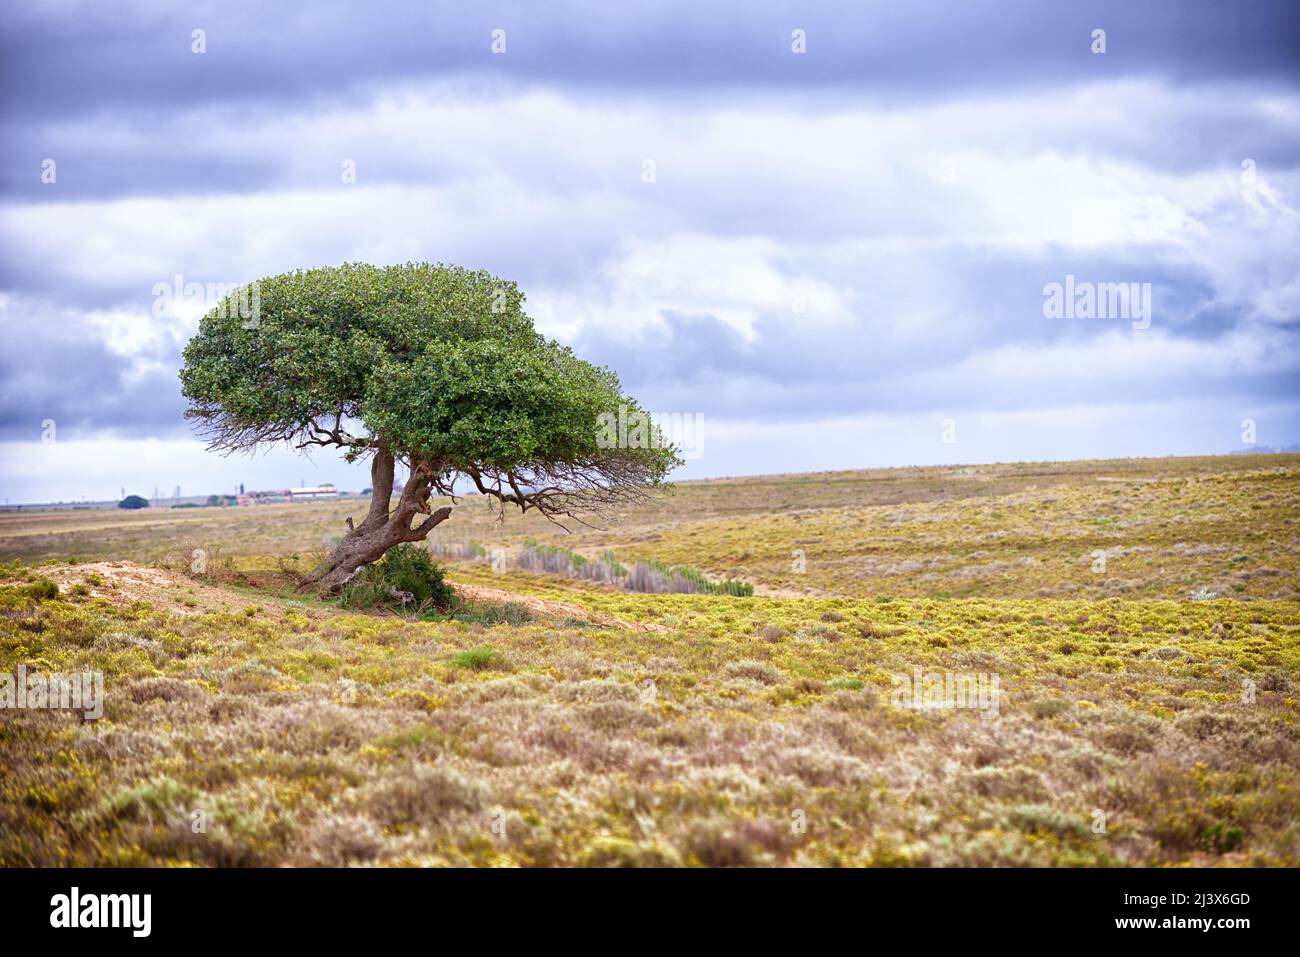 Tree of life. A tree standing on a remote African landscape - copyspace. Stock Photo